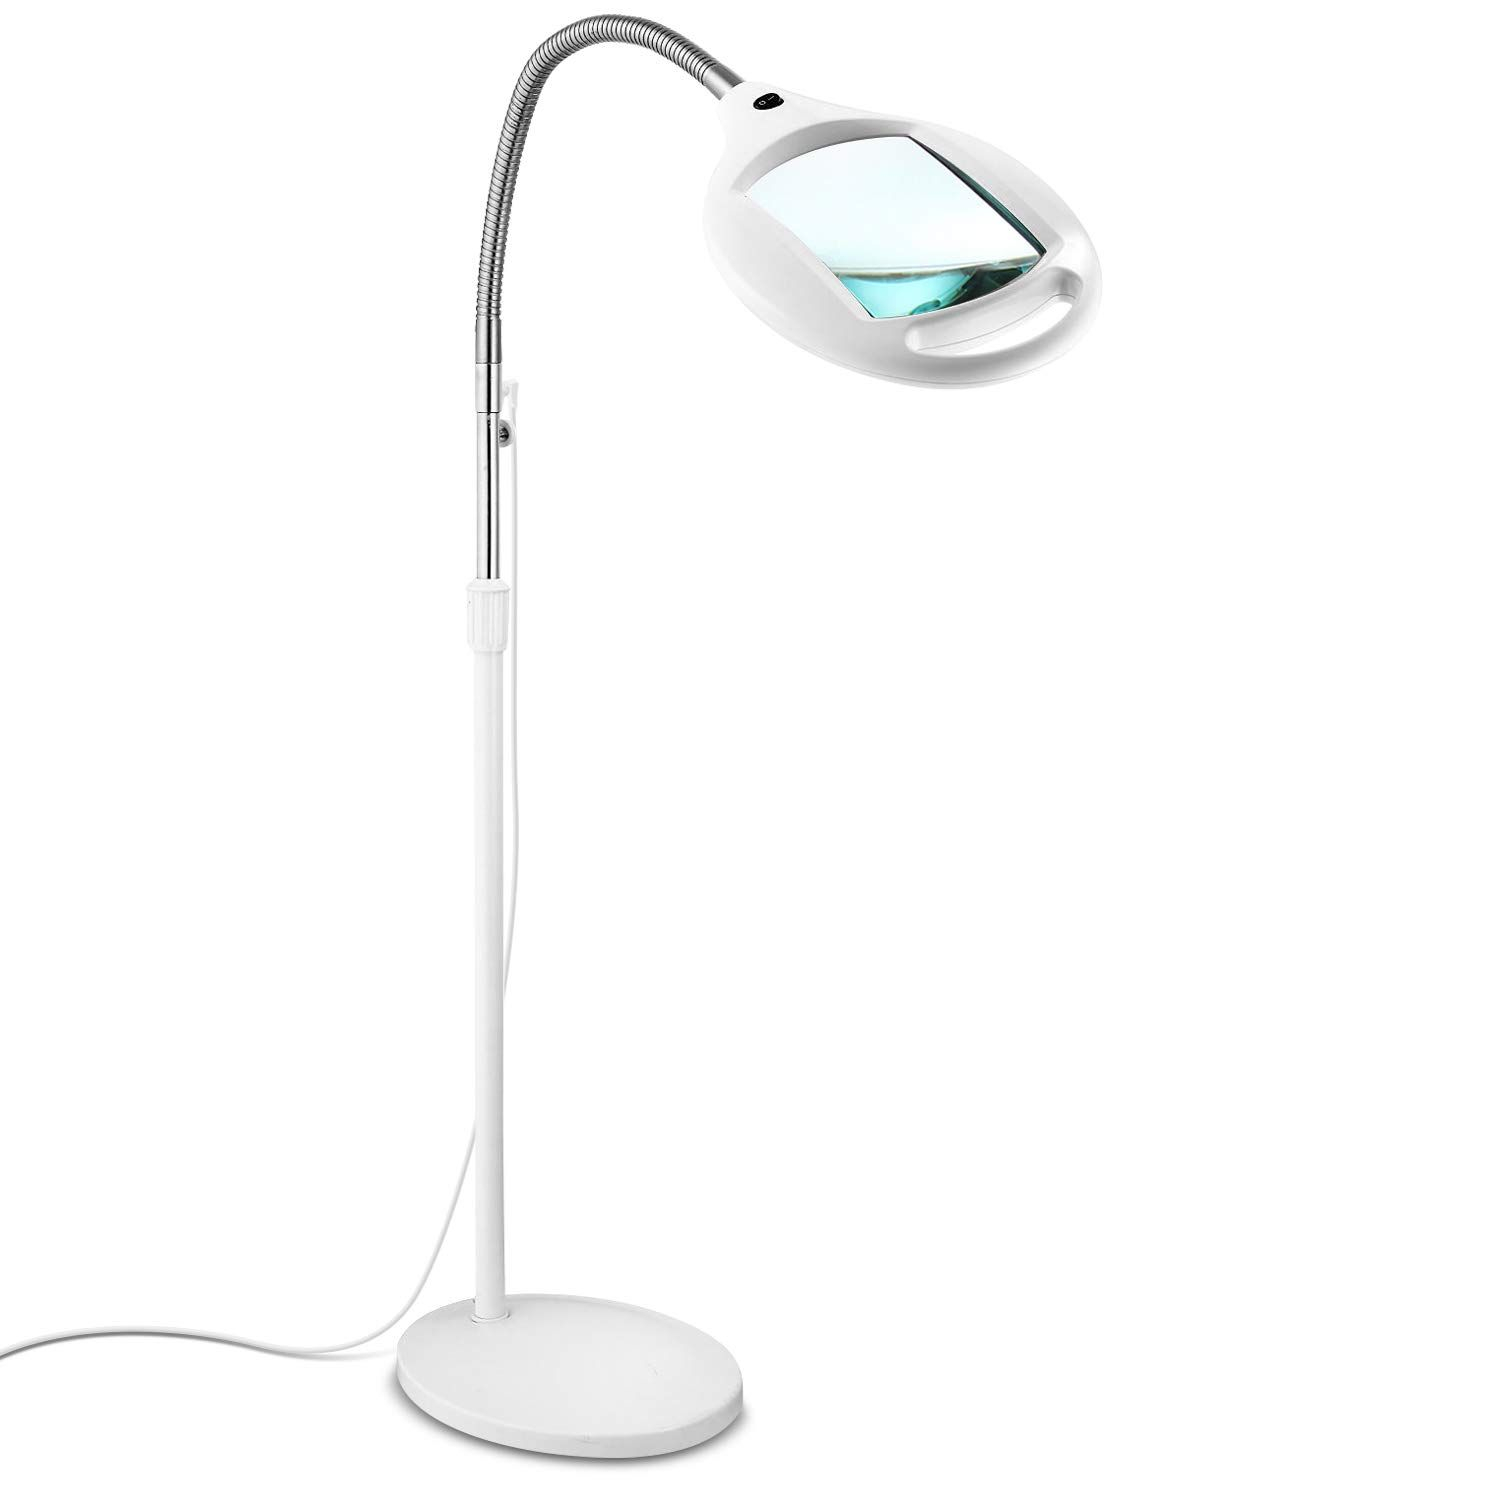 Brightech Lightview Pro Led Magnifying Floor Lamp Daylight inside size 1500 X 1500